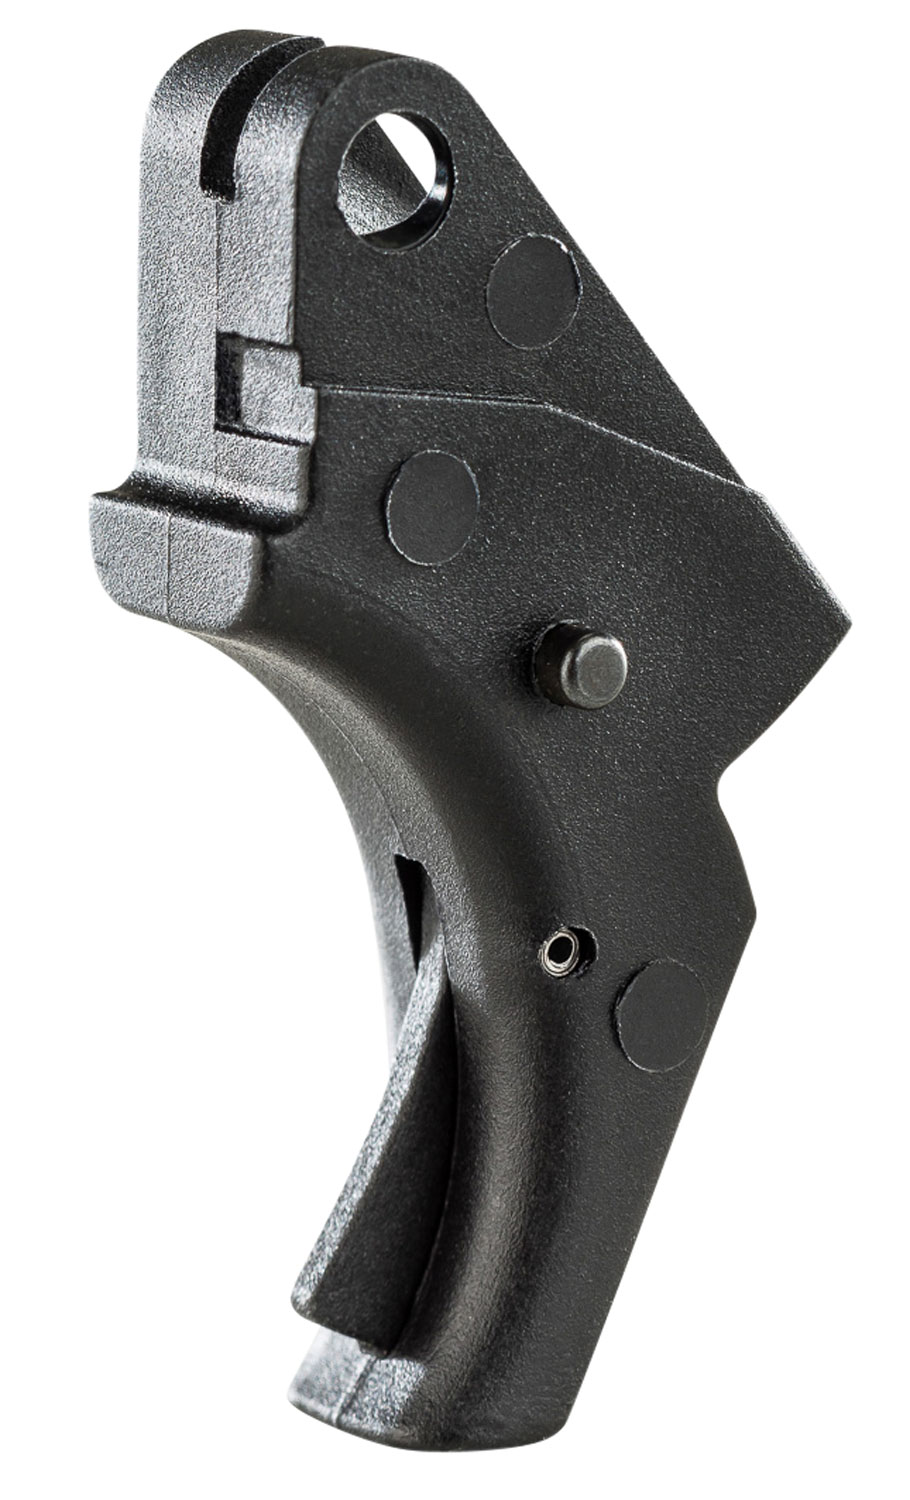 Apex Tactical 100126 Action Enhancement Kit Drop-in Trigger with 5-5.50 lbs Draw Weight & Black Finish for S&W M&P 2.0